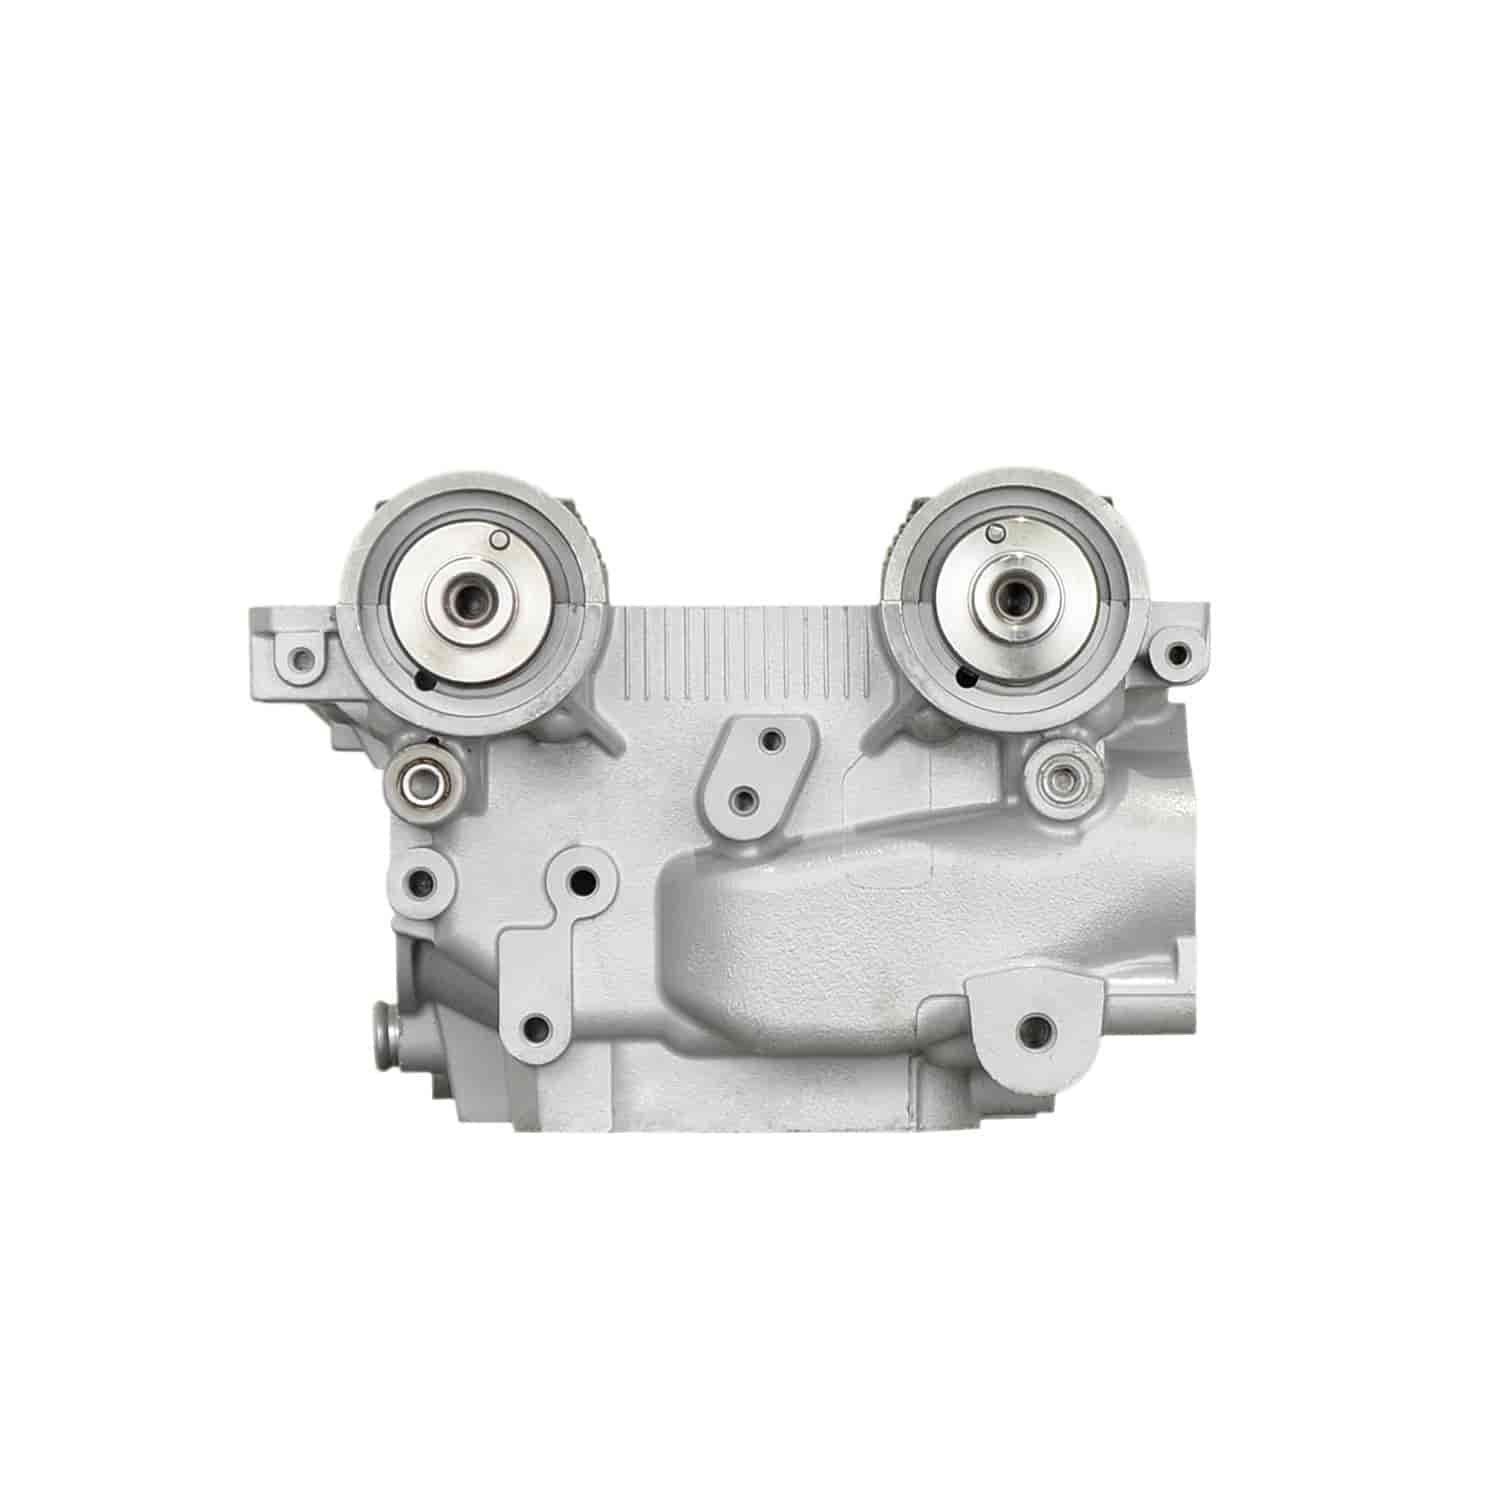 Remanufactured Cylinder Head for 2011-2013 Chevy with 1.8L